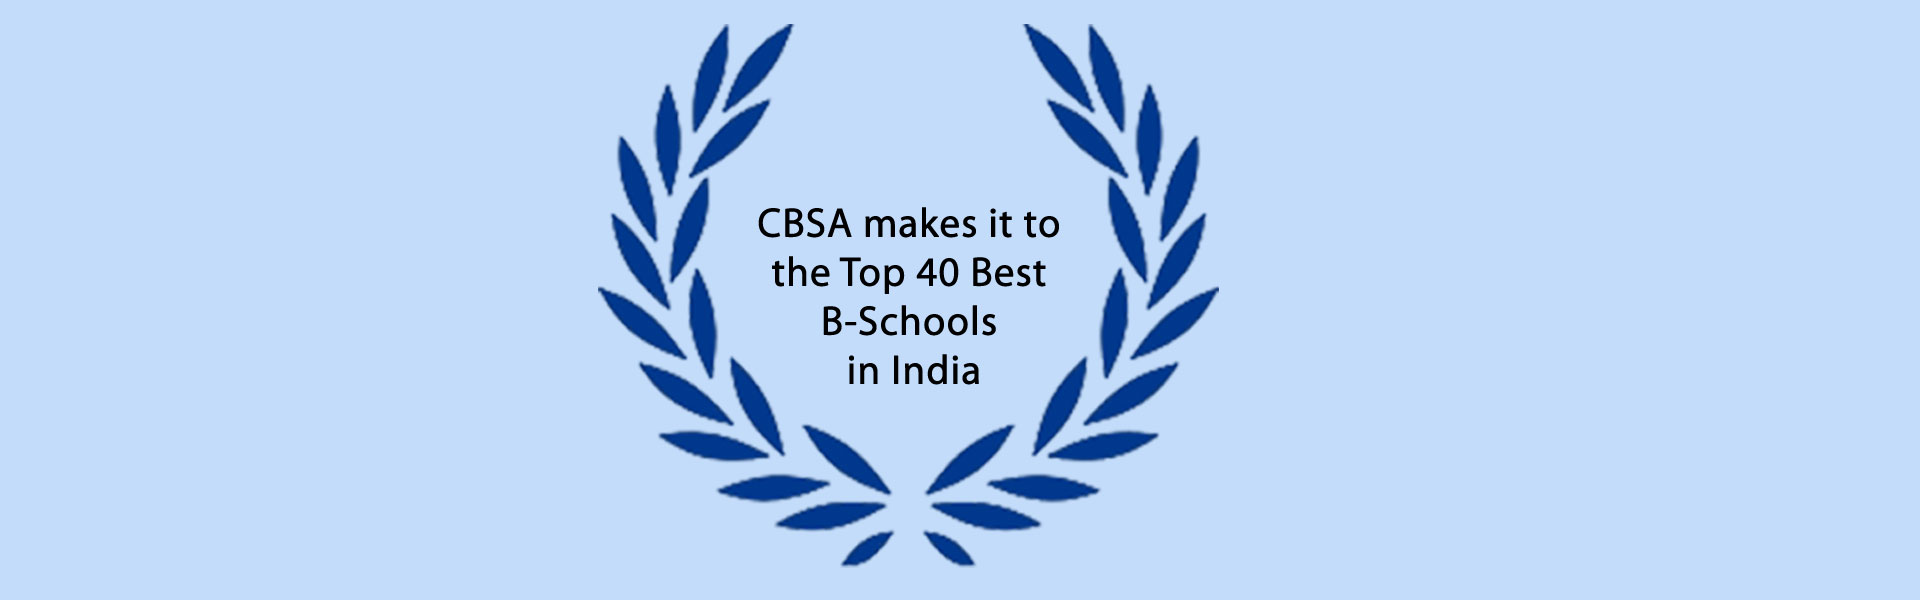 CBSA makes it to the Top 40 Best B-Schools in India 